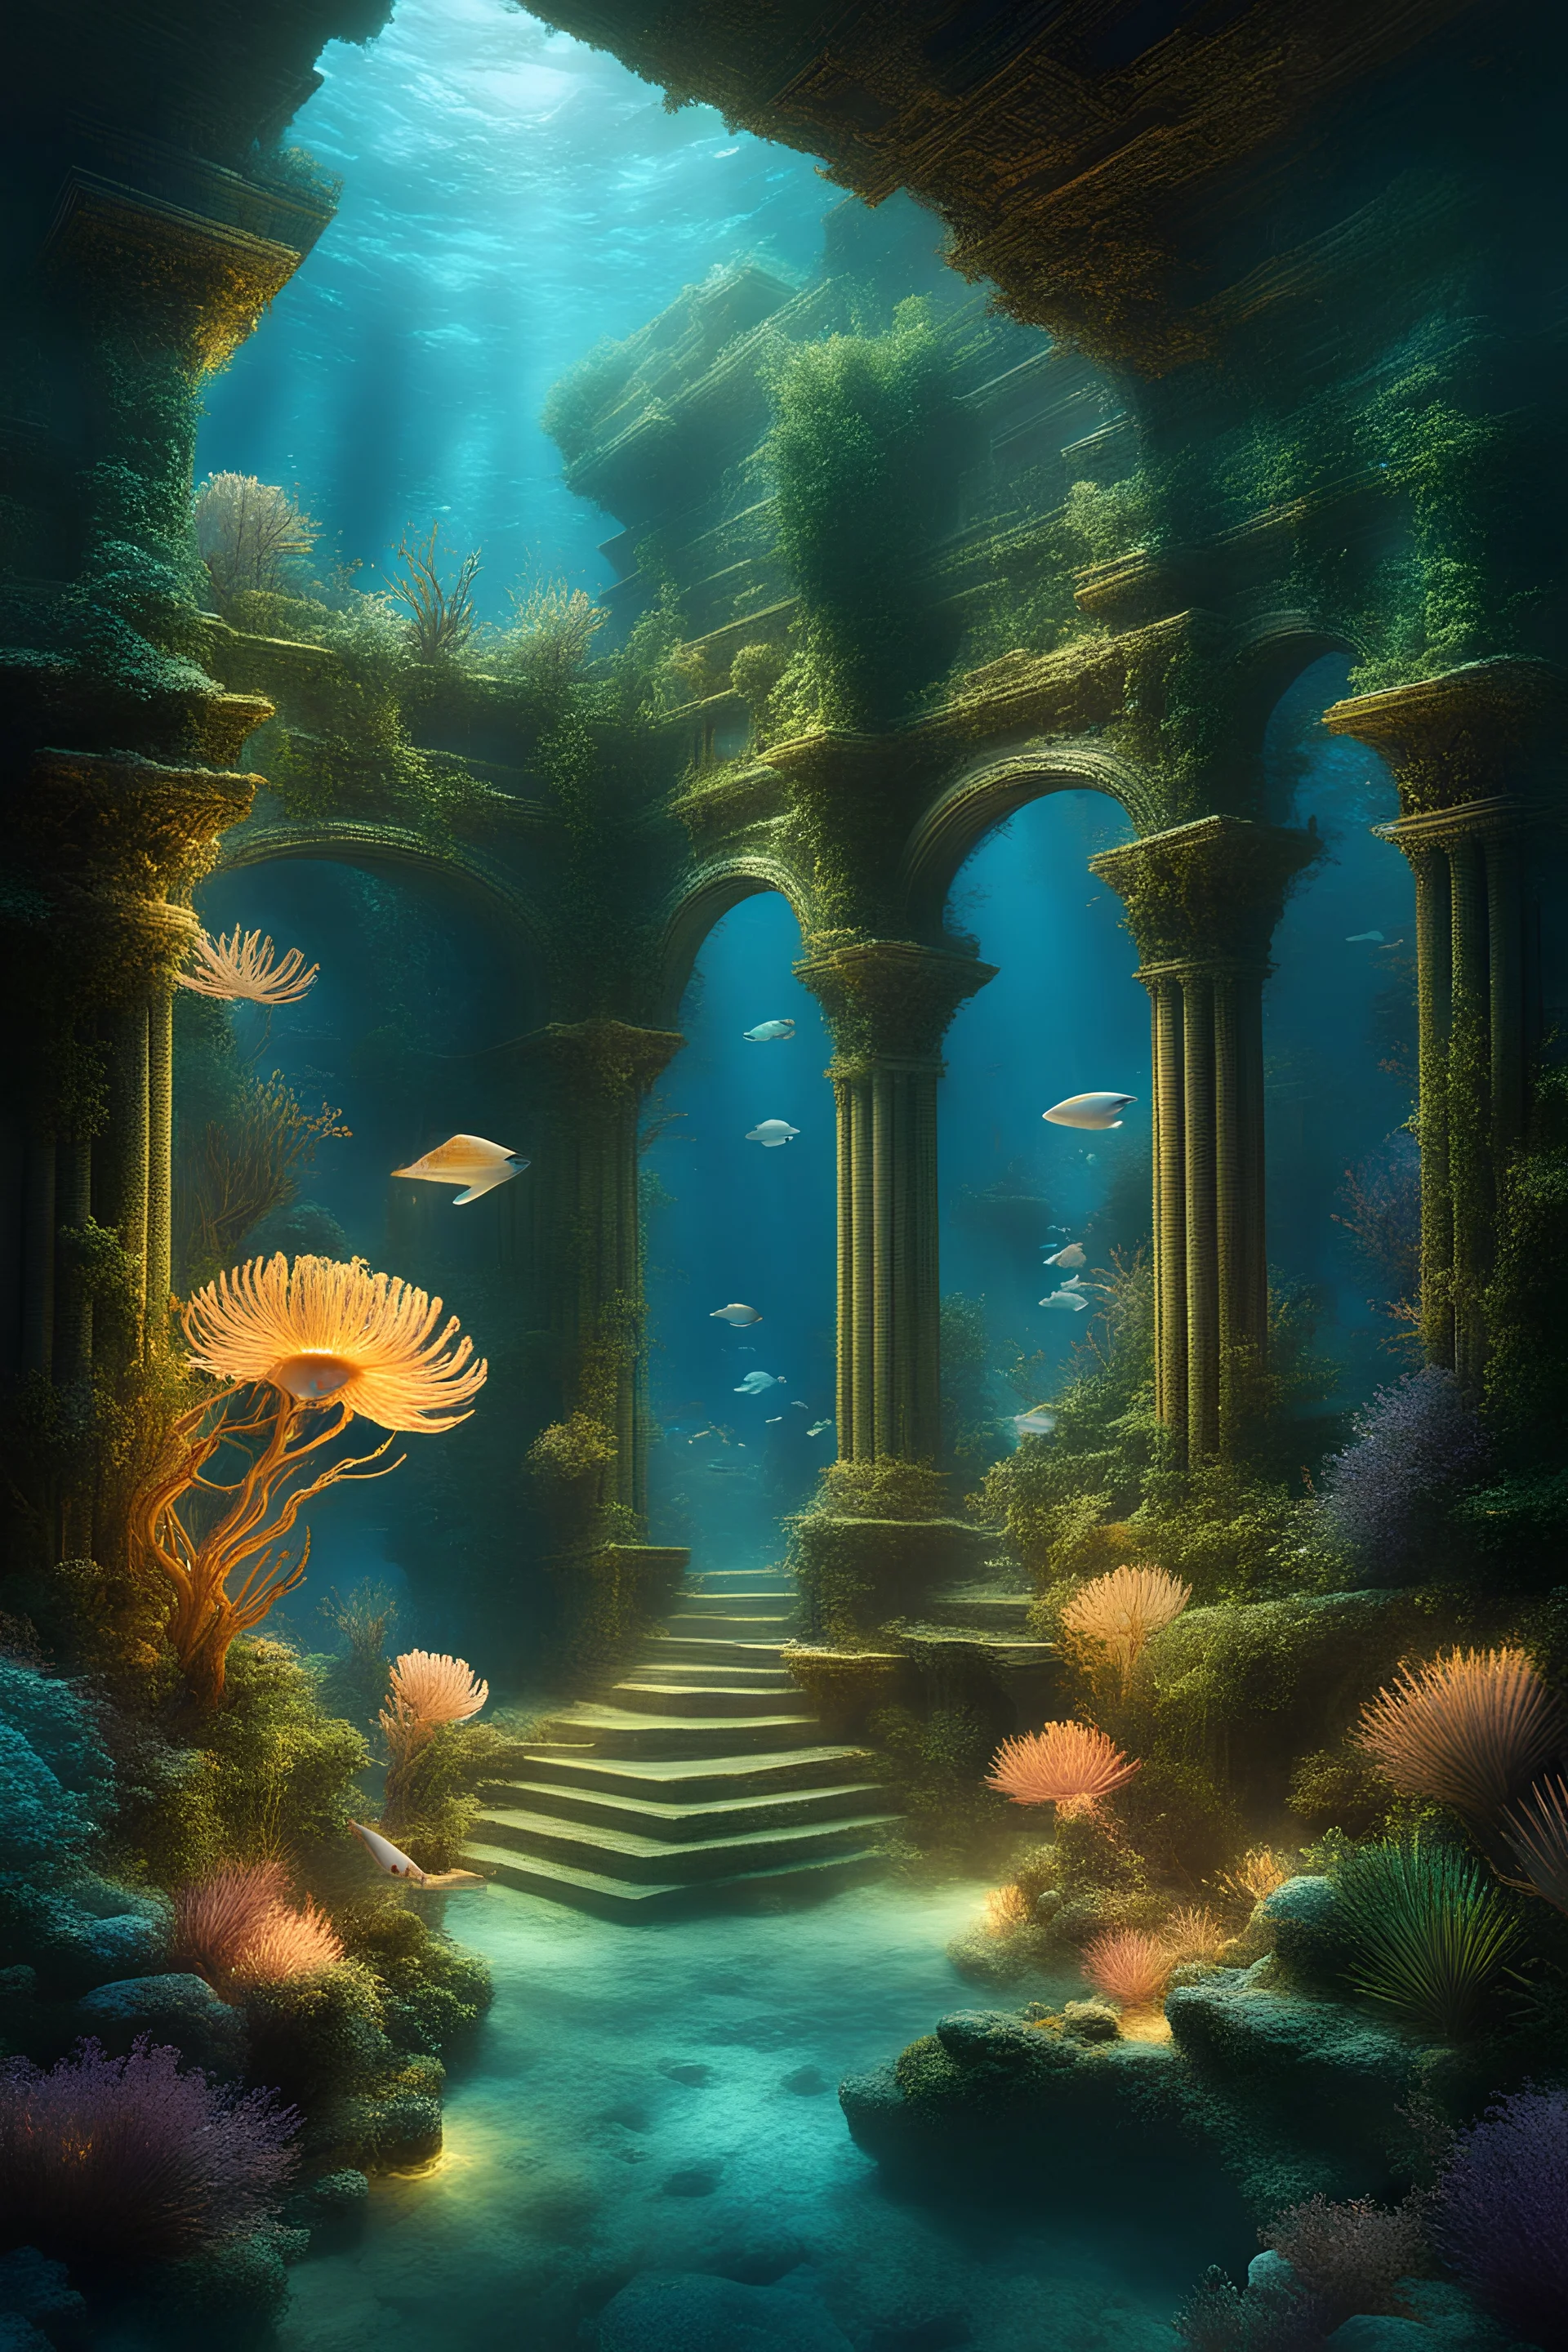 create a render: Beneath the depths of the ocean lie the submerged remnants of an ancient civilization, their once-grand structures now adorned with the soft glow of bioluminescence. Picture the ethereal scene where enigmatic sea creatures, radiating vibrant hues, gracefully navigate through the watery ruins. Inspired by Jorge Jacinto's evocative style, envision the delicate dance of light and shadow in this submerged realm, where the echoes of an ancient civilization intertwine with the enchant